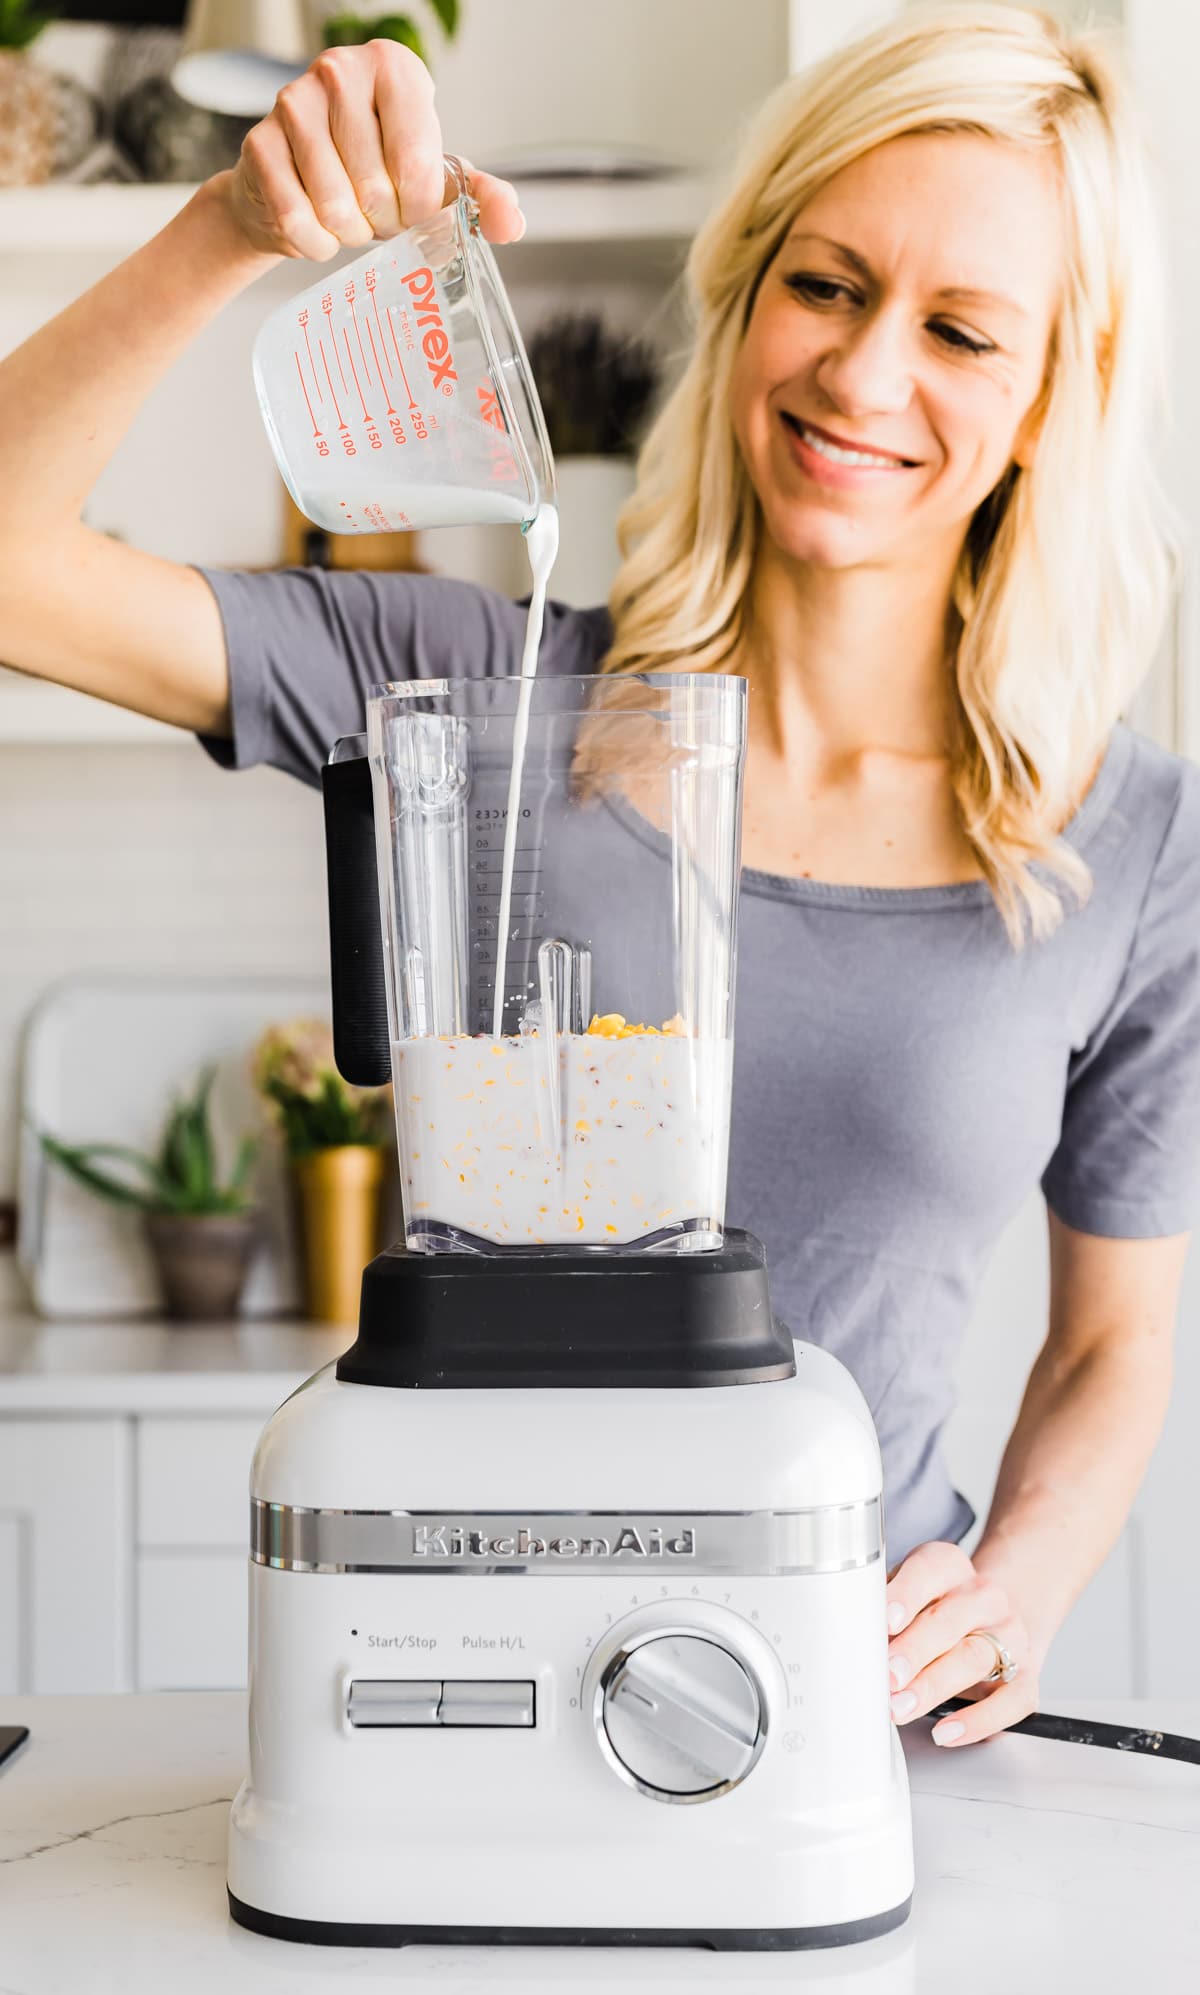 A woman standing behind kitchenaid blender pouring milk into blender cup.